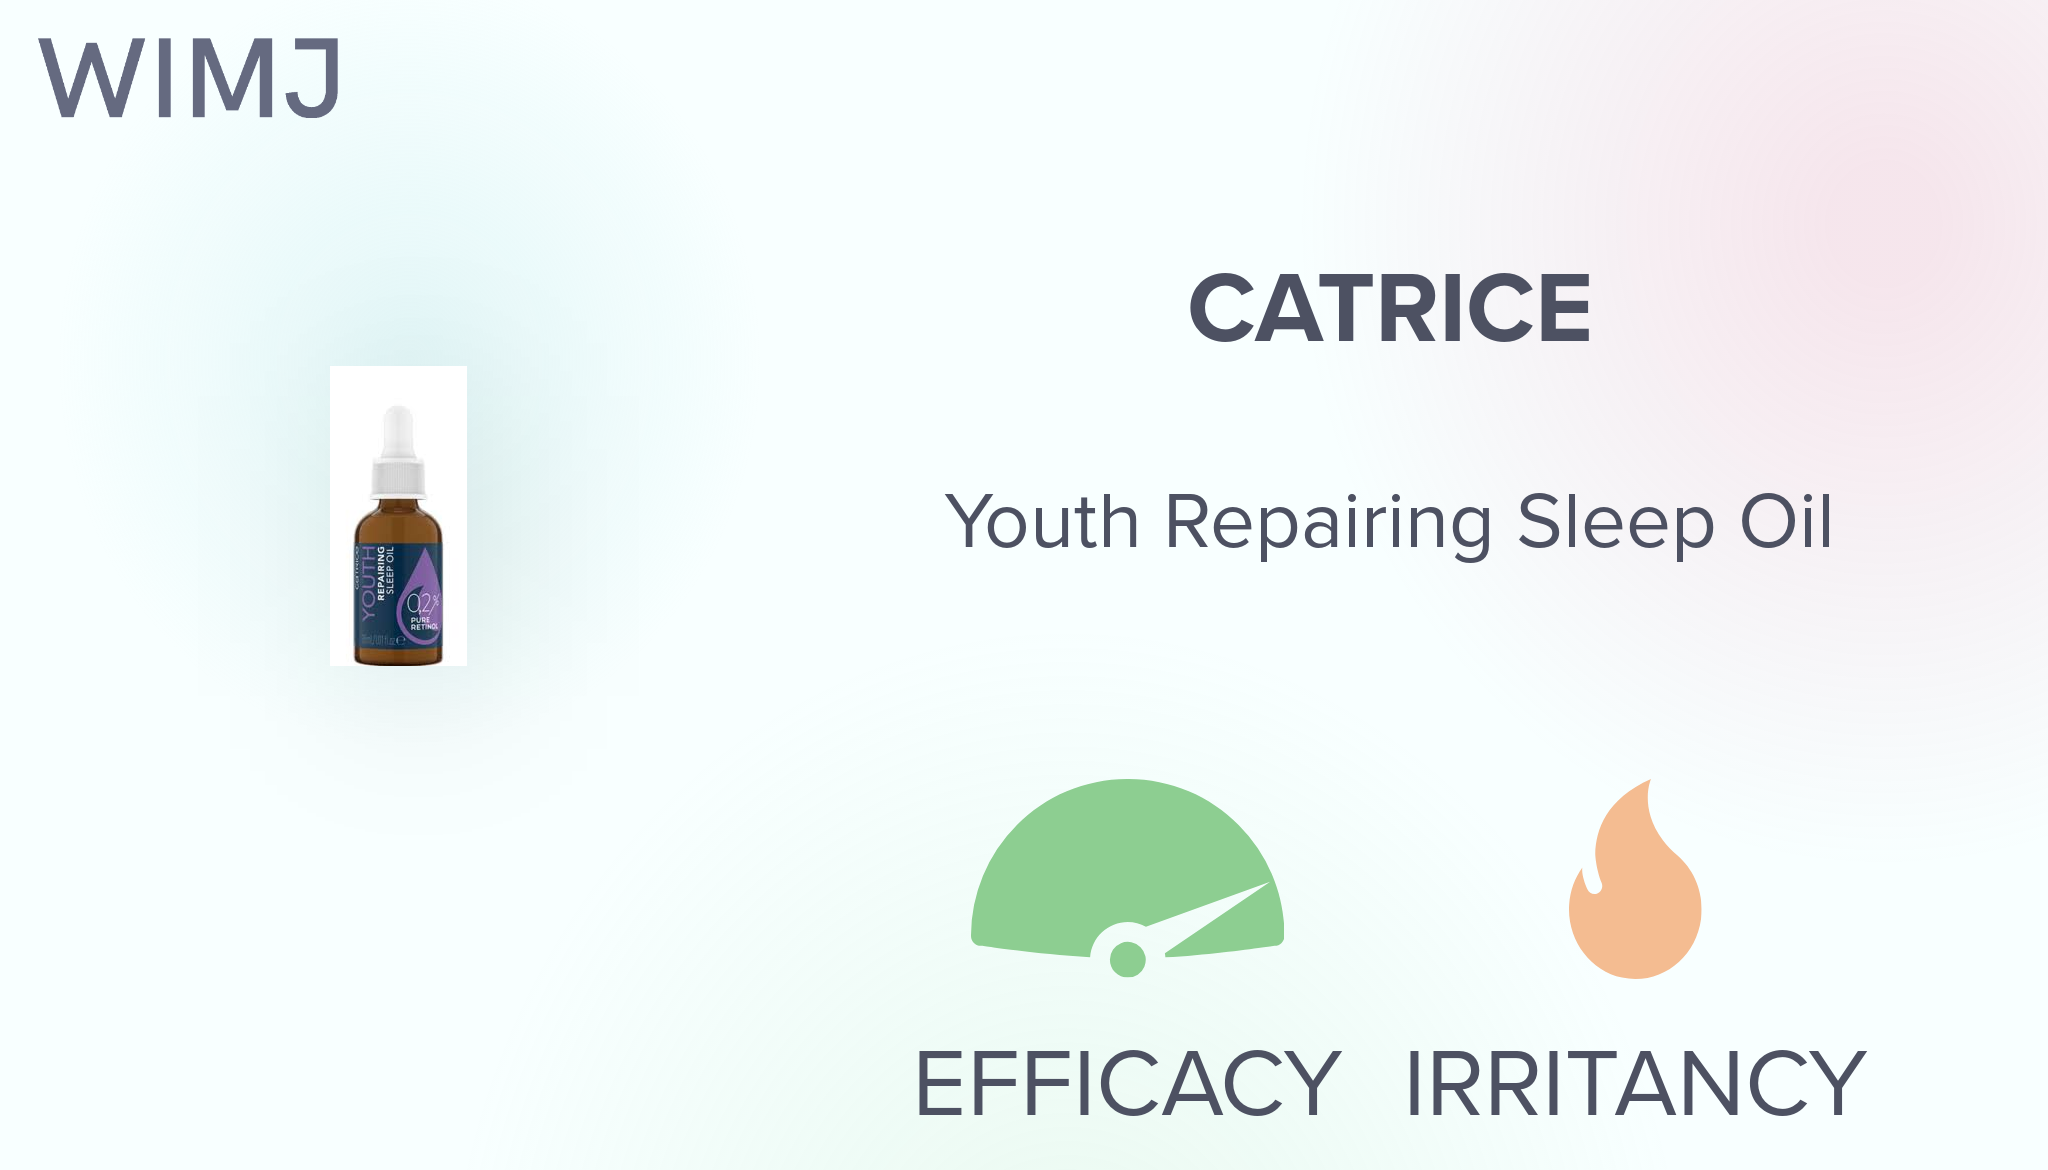 Review: Catrice - Youth Repairing Sleep Oil - WIMJ